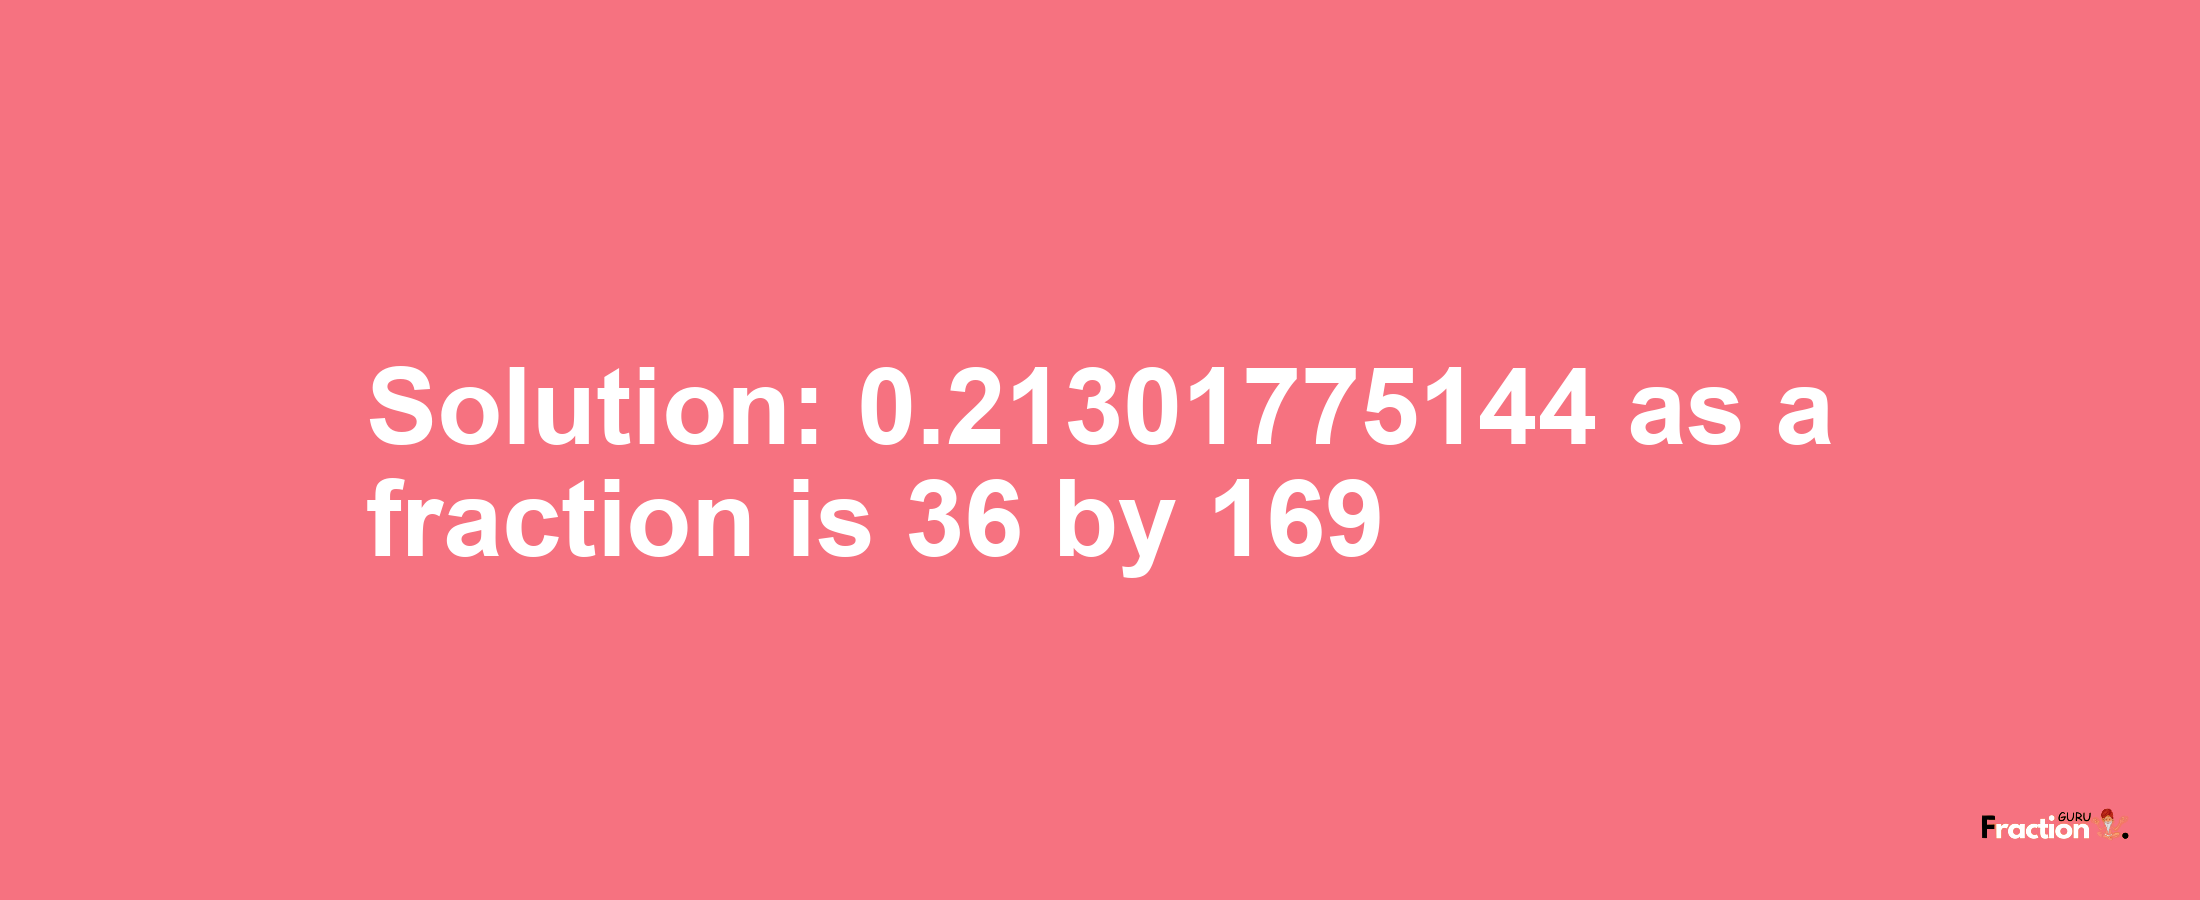 Solution:0.21301775144 as a fraction is 36/169